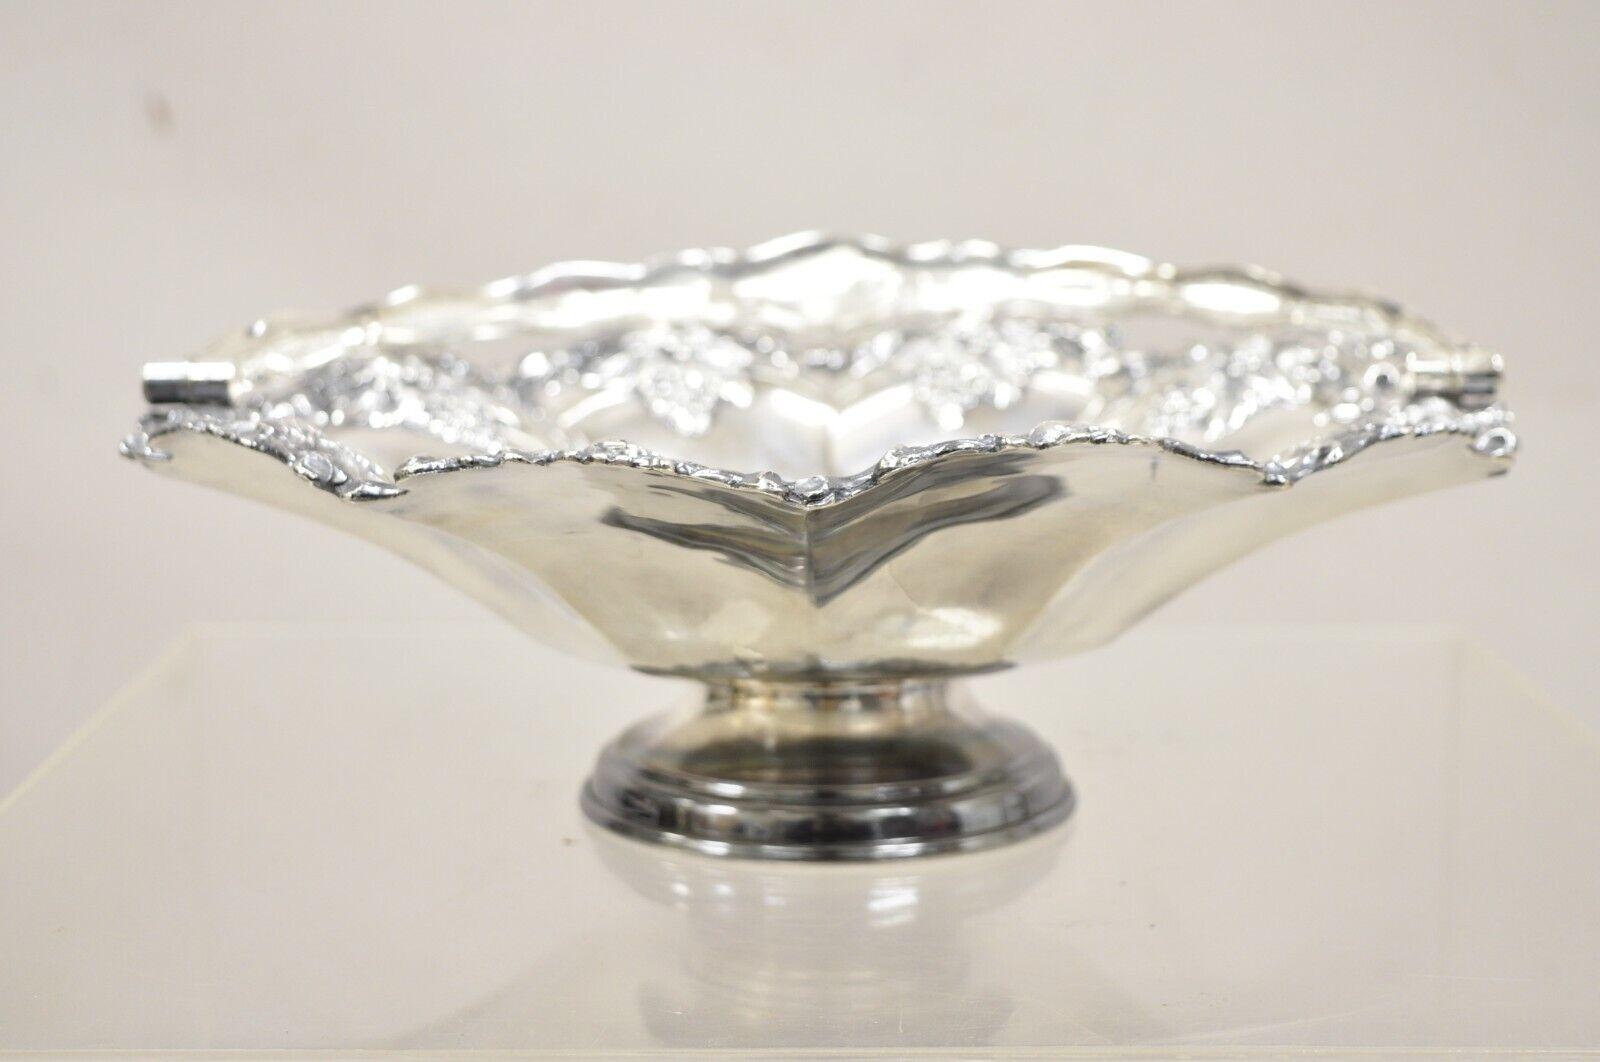 Antique English Victorian Grapevine Cluster Silver Plated Fruit Bowl Basket with Handle. Circa Early 20th Century. Measurements: 4